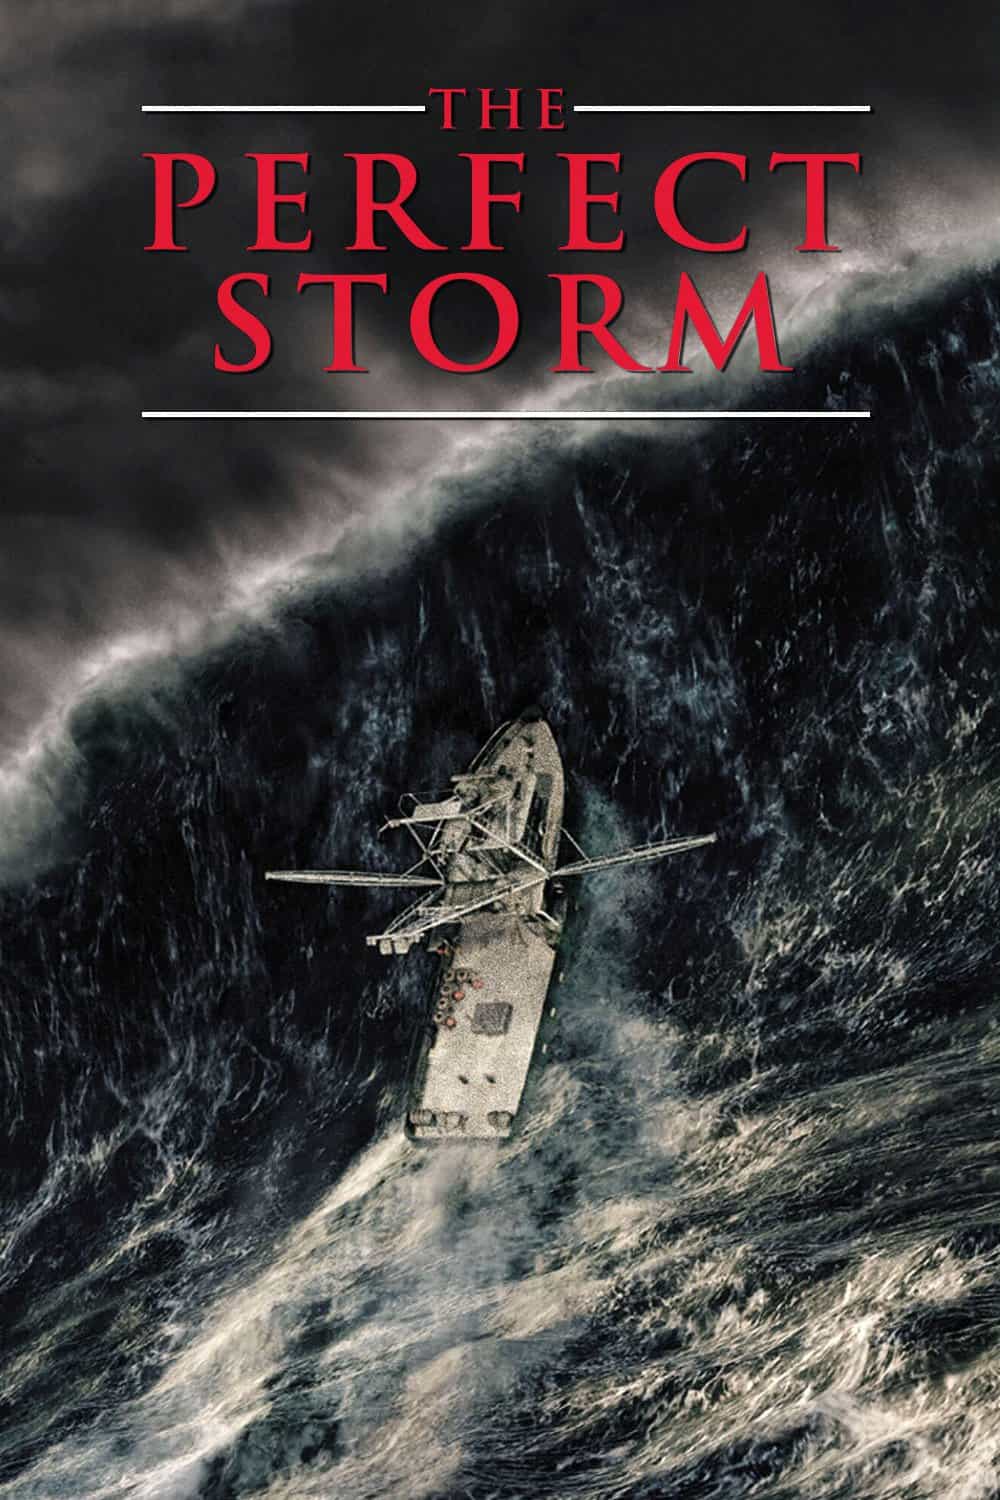 The Perfect Storm, 2000 